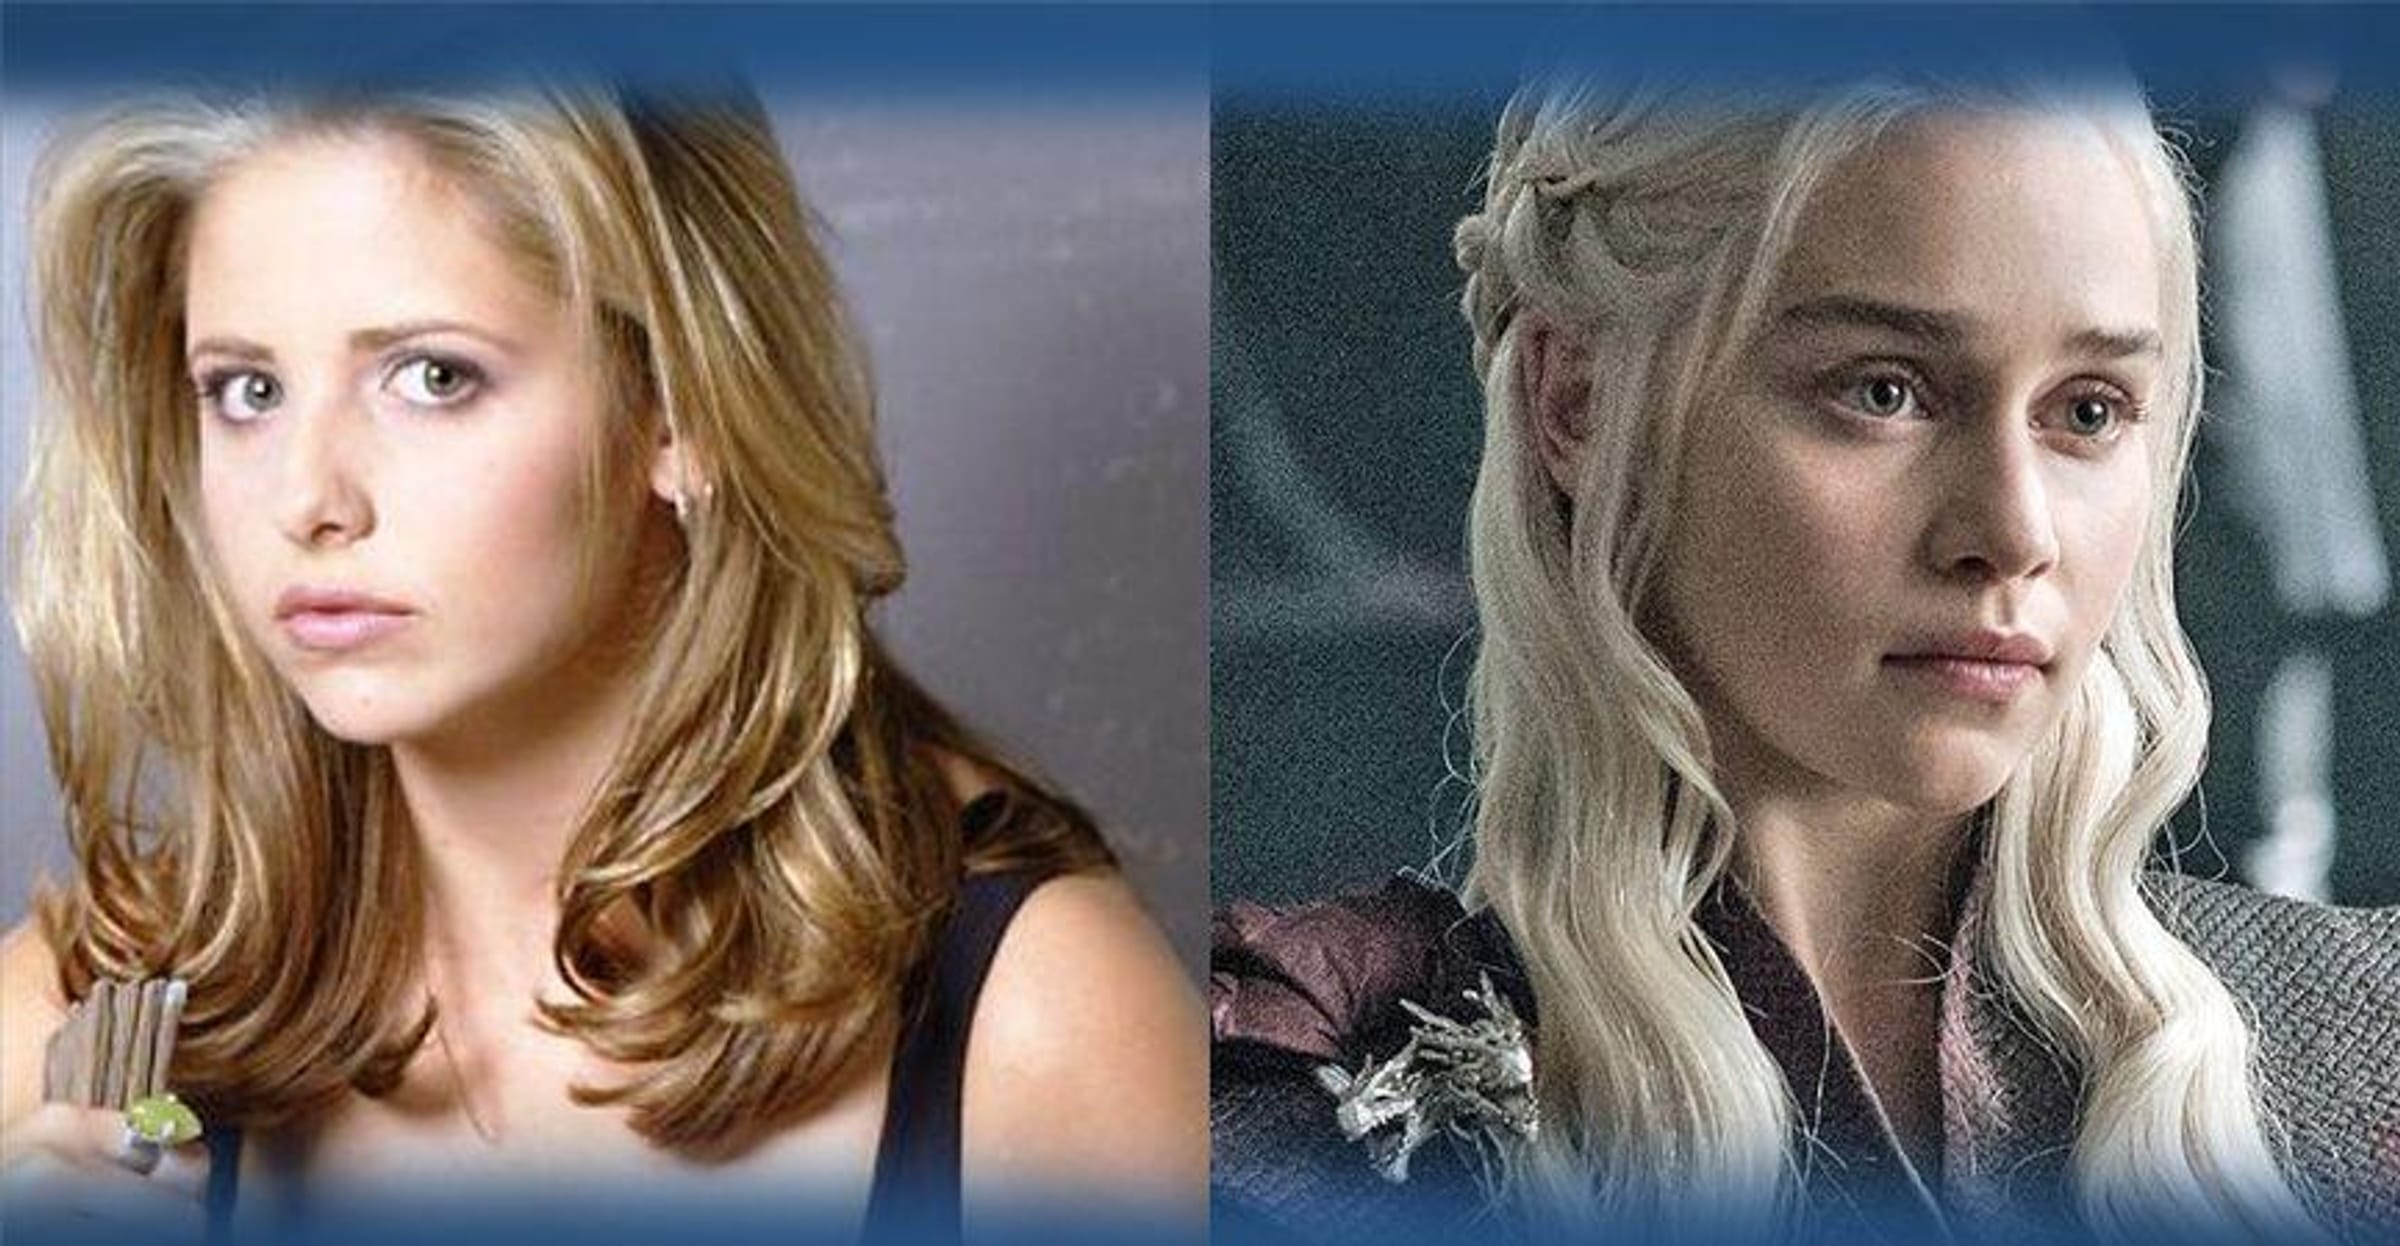 Gender Roles In Game Of Thrones And Buffy The Vampire Slayer